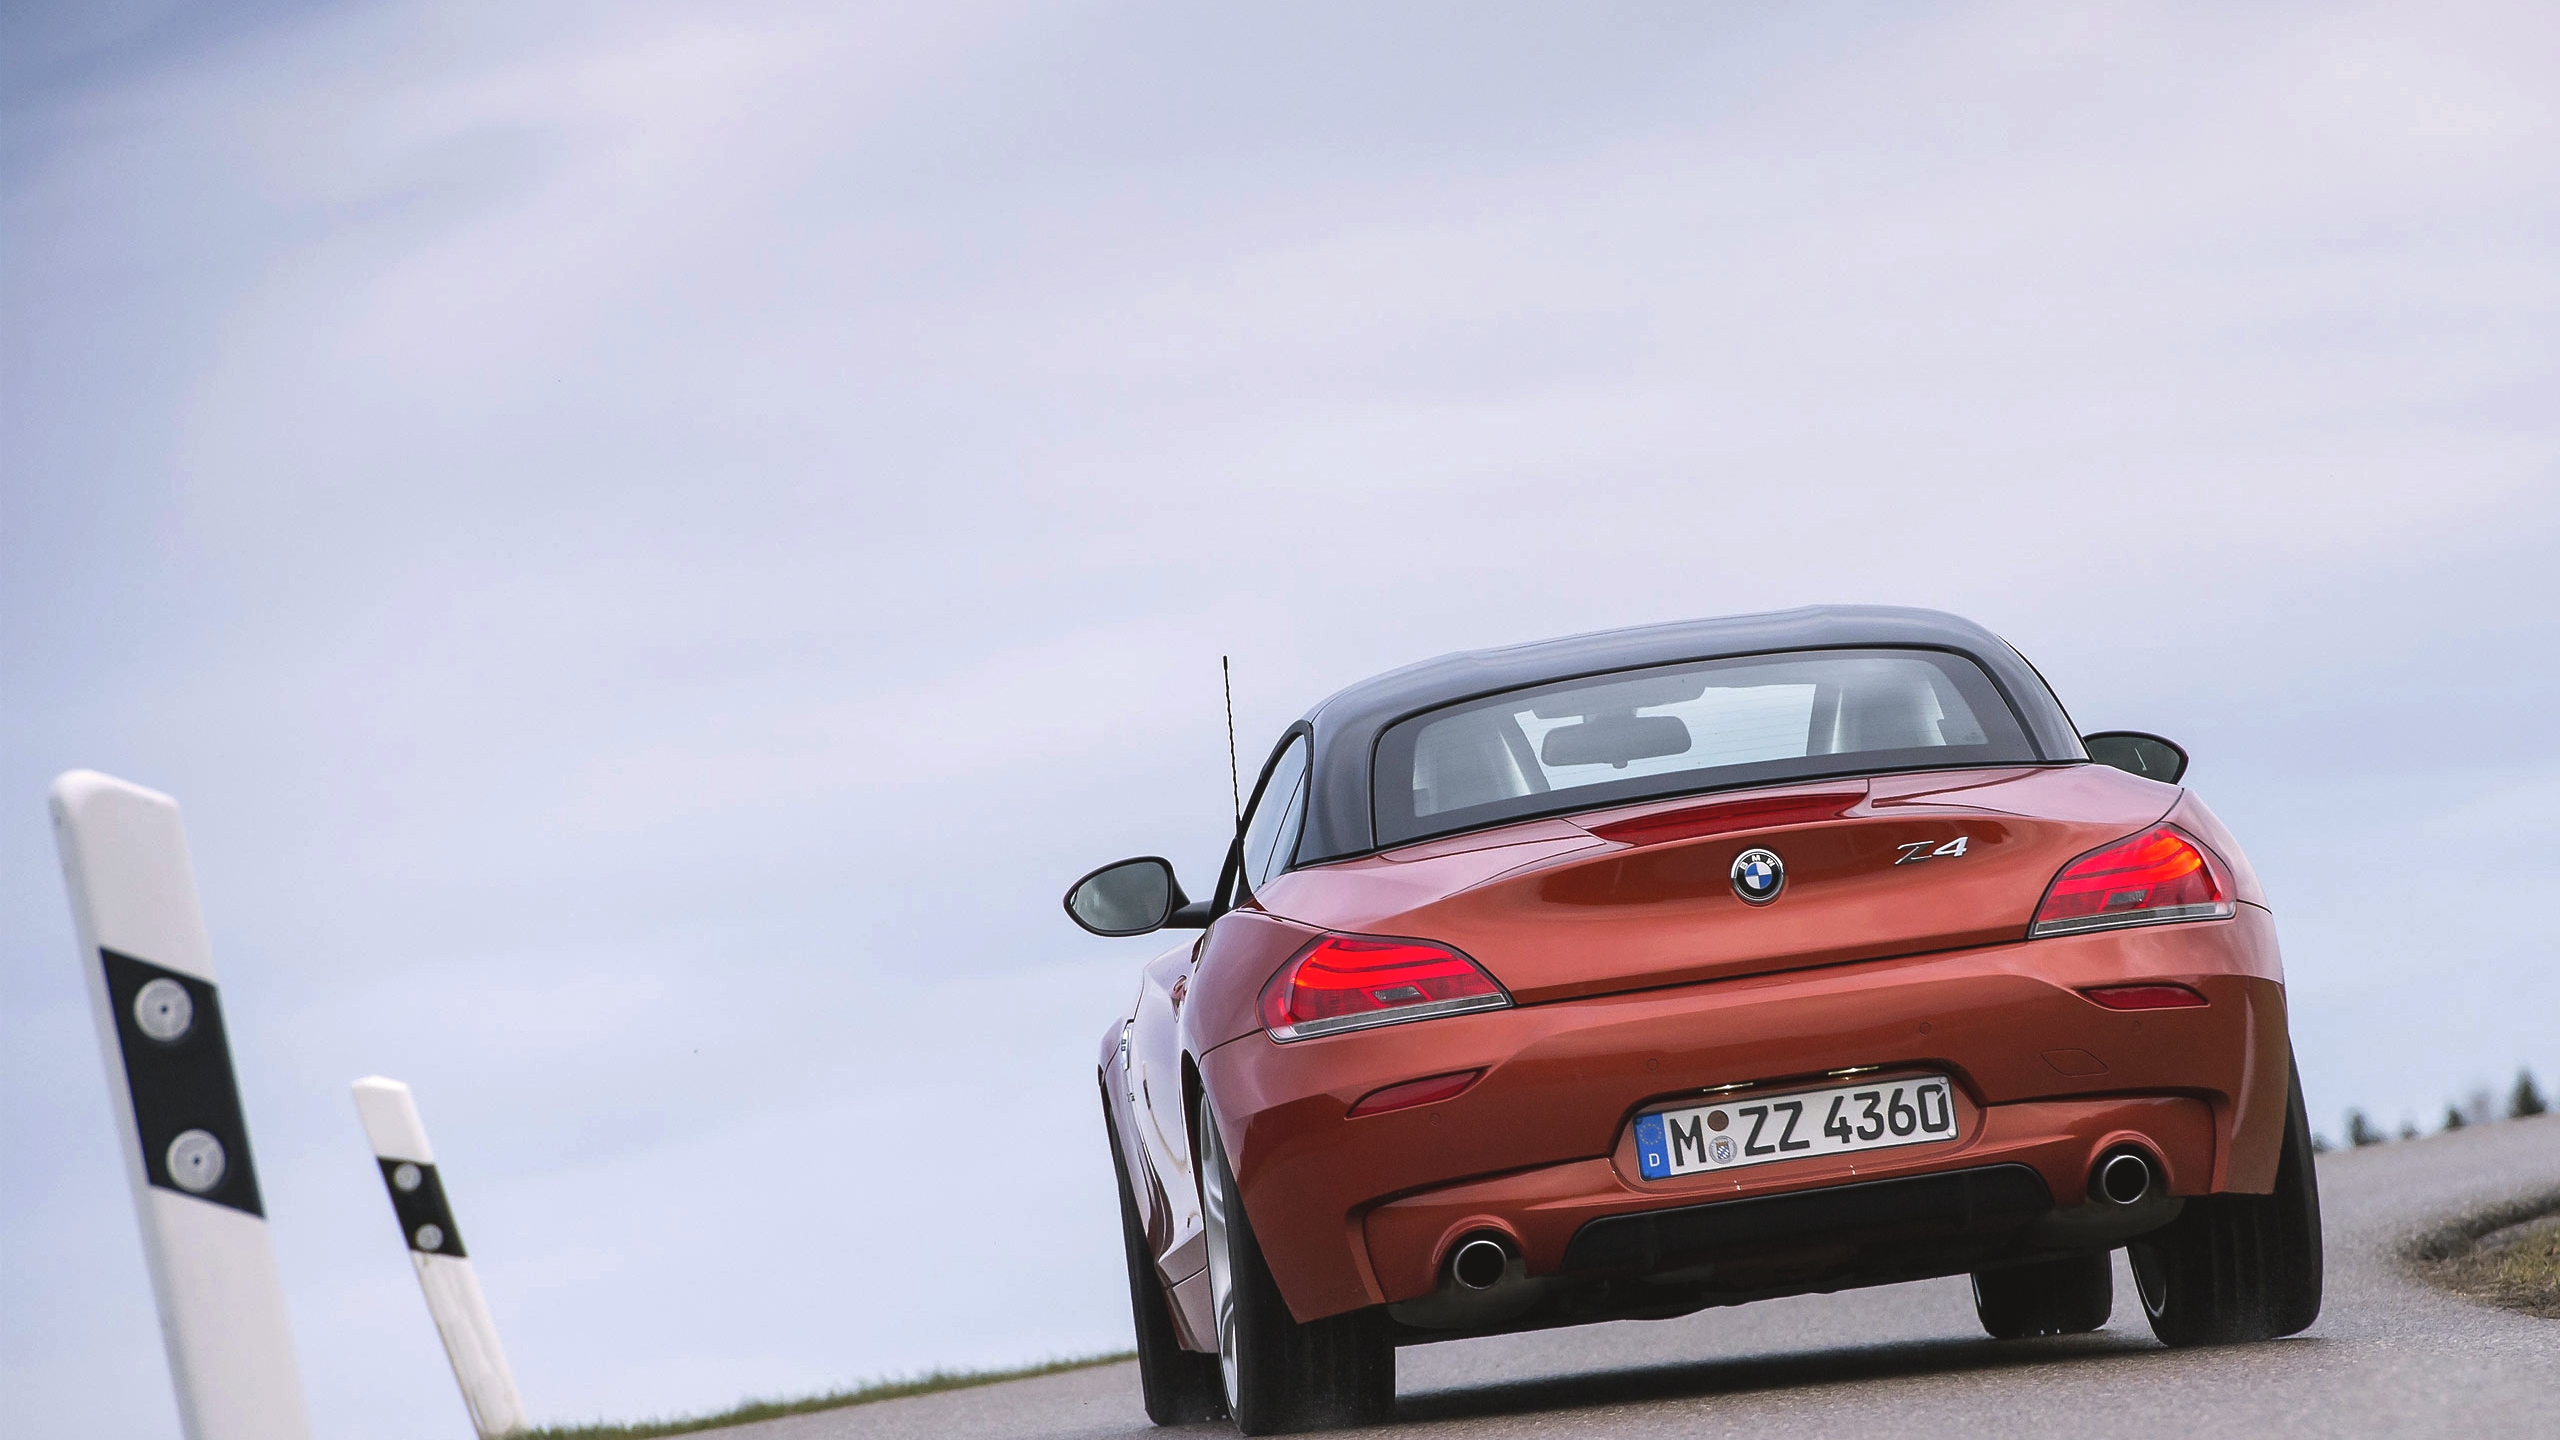 BMW Z4 Roadster Back View for 2560x1440 HDTV resolution